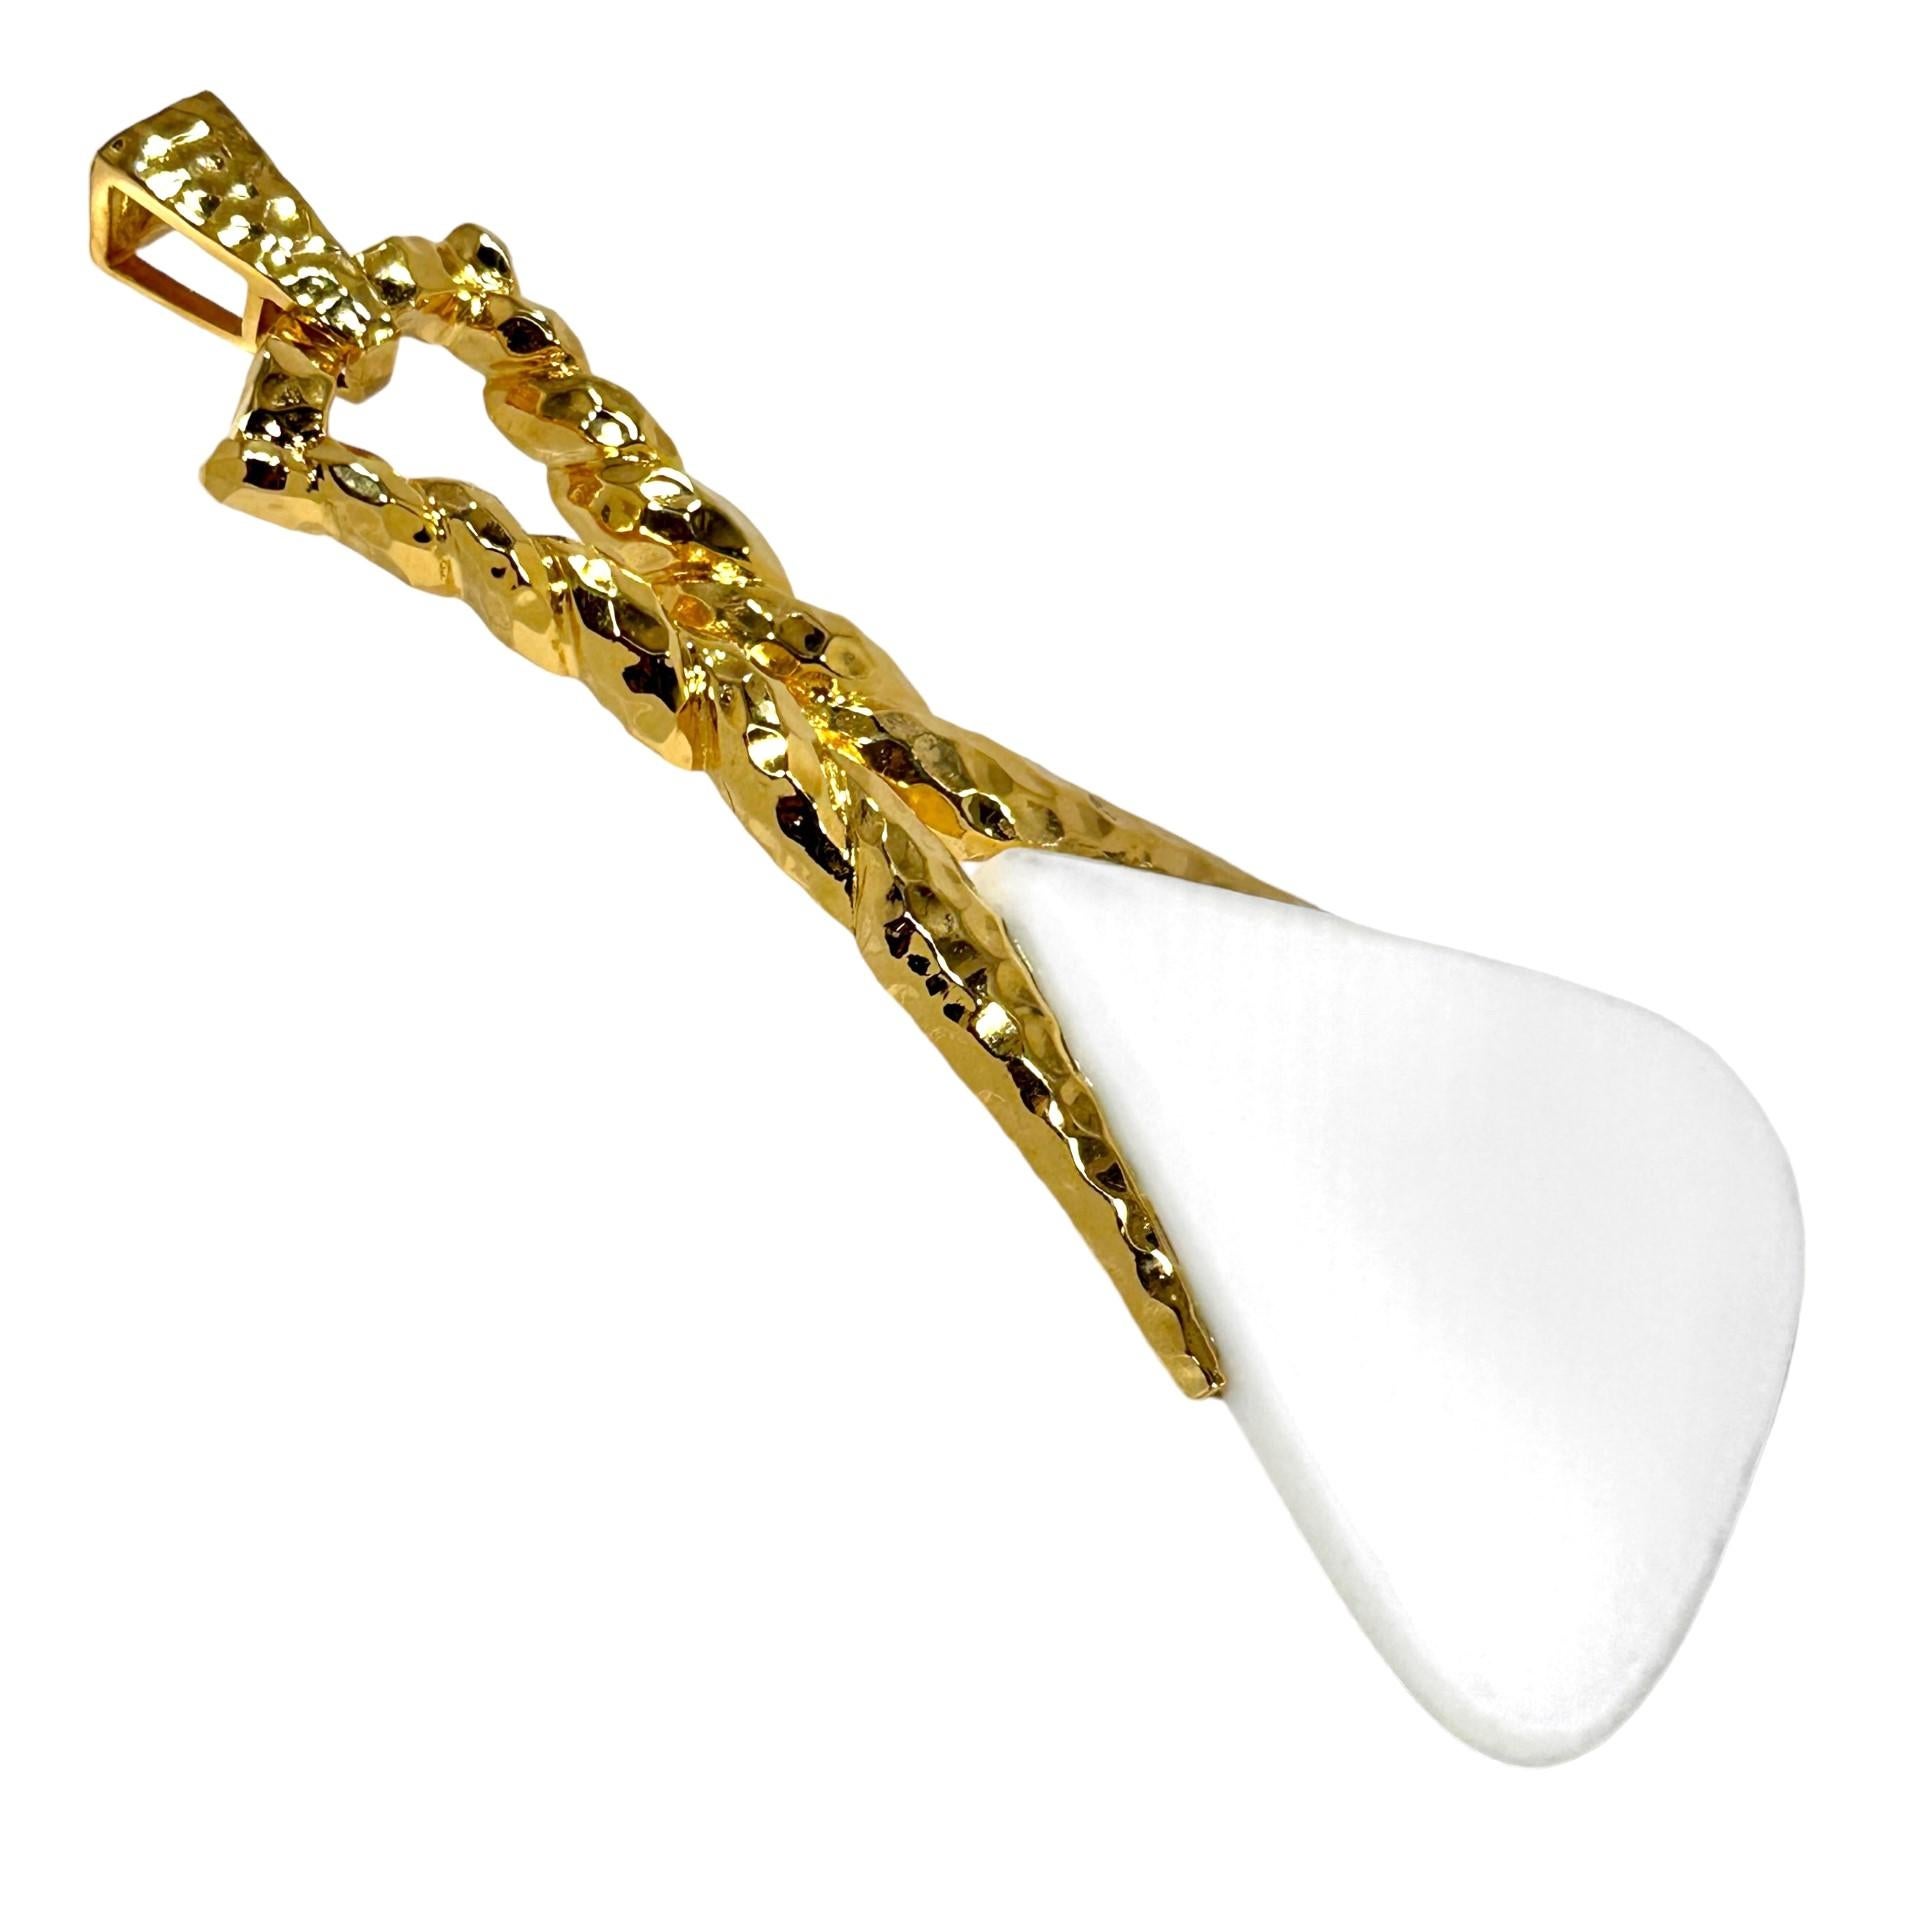 This magnificent 14k yellow gold and white onyx pendant by Wander is a very well crafted example of the hammered finishes of the 1960's and 1970's. It is big, bold and brash, measuring a full 4 3/8 inches in length by 2 1/8 inches in width. The very